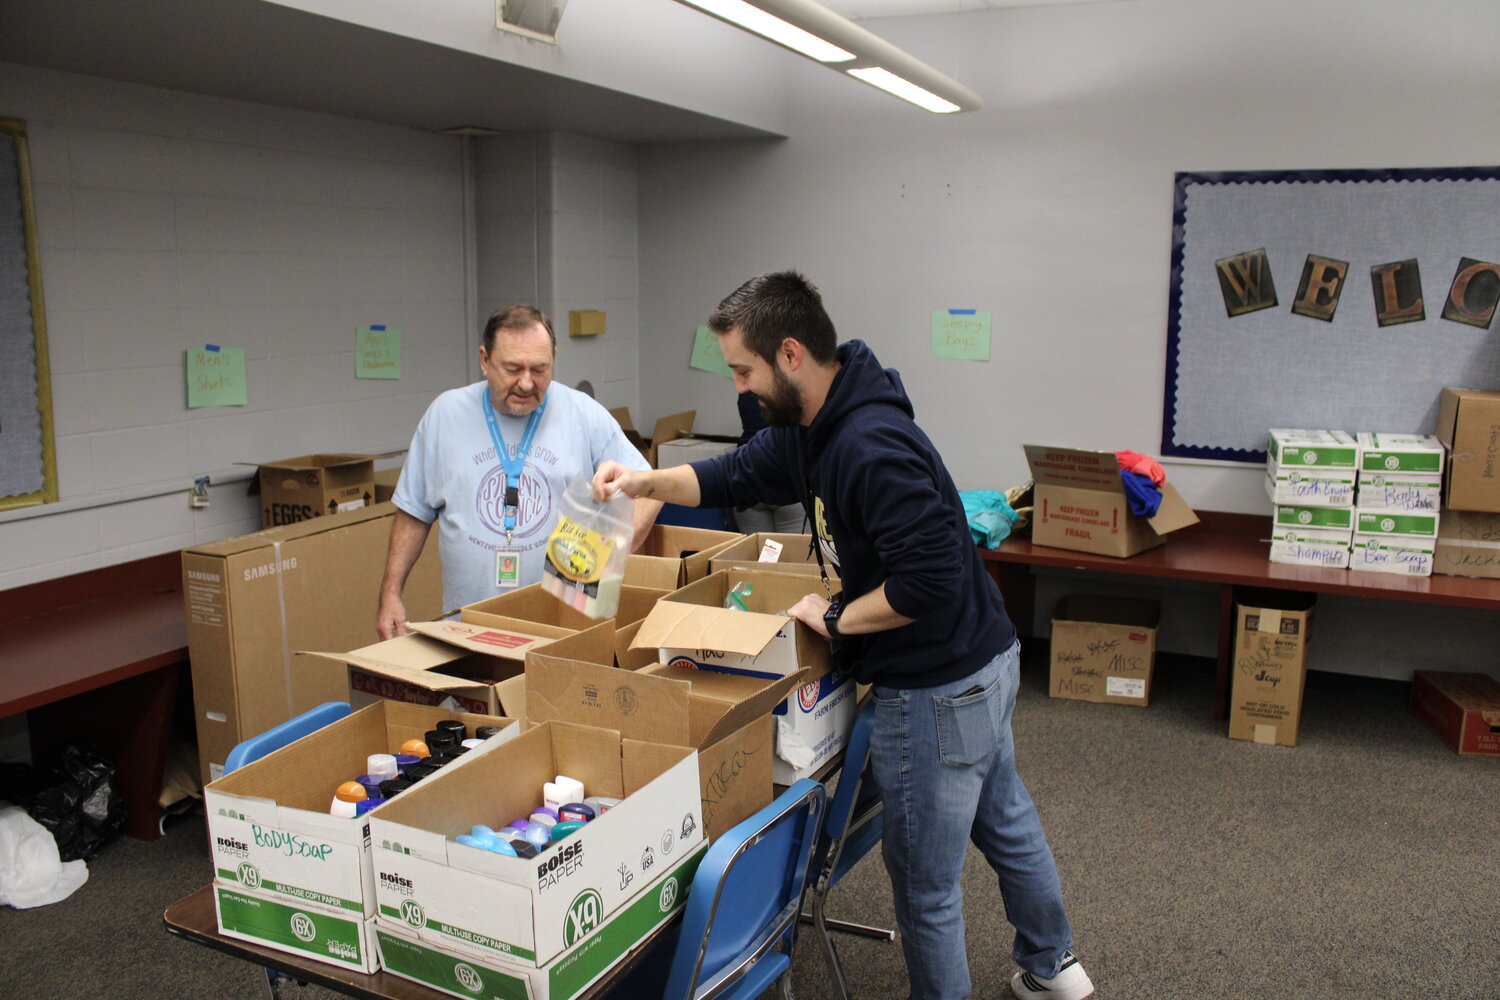 Truesdale Mayor Jerry Cannon, who also serves as the student council sponsor at Wentzville Middle School, and his co-sponsor, Josh Lanham, sort through personal items that were donated to help homeless veterans.